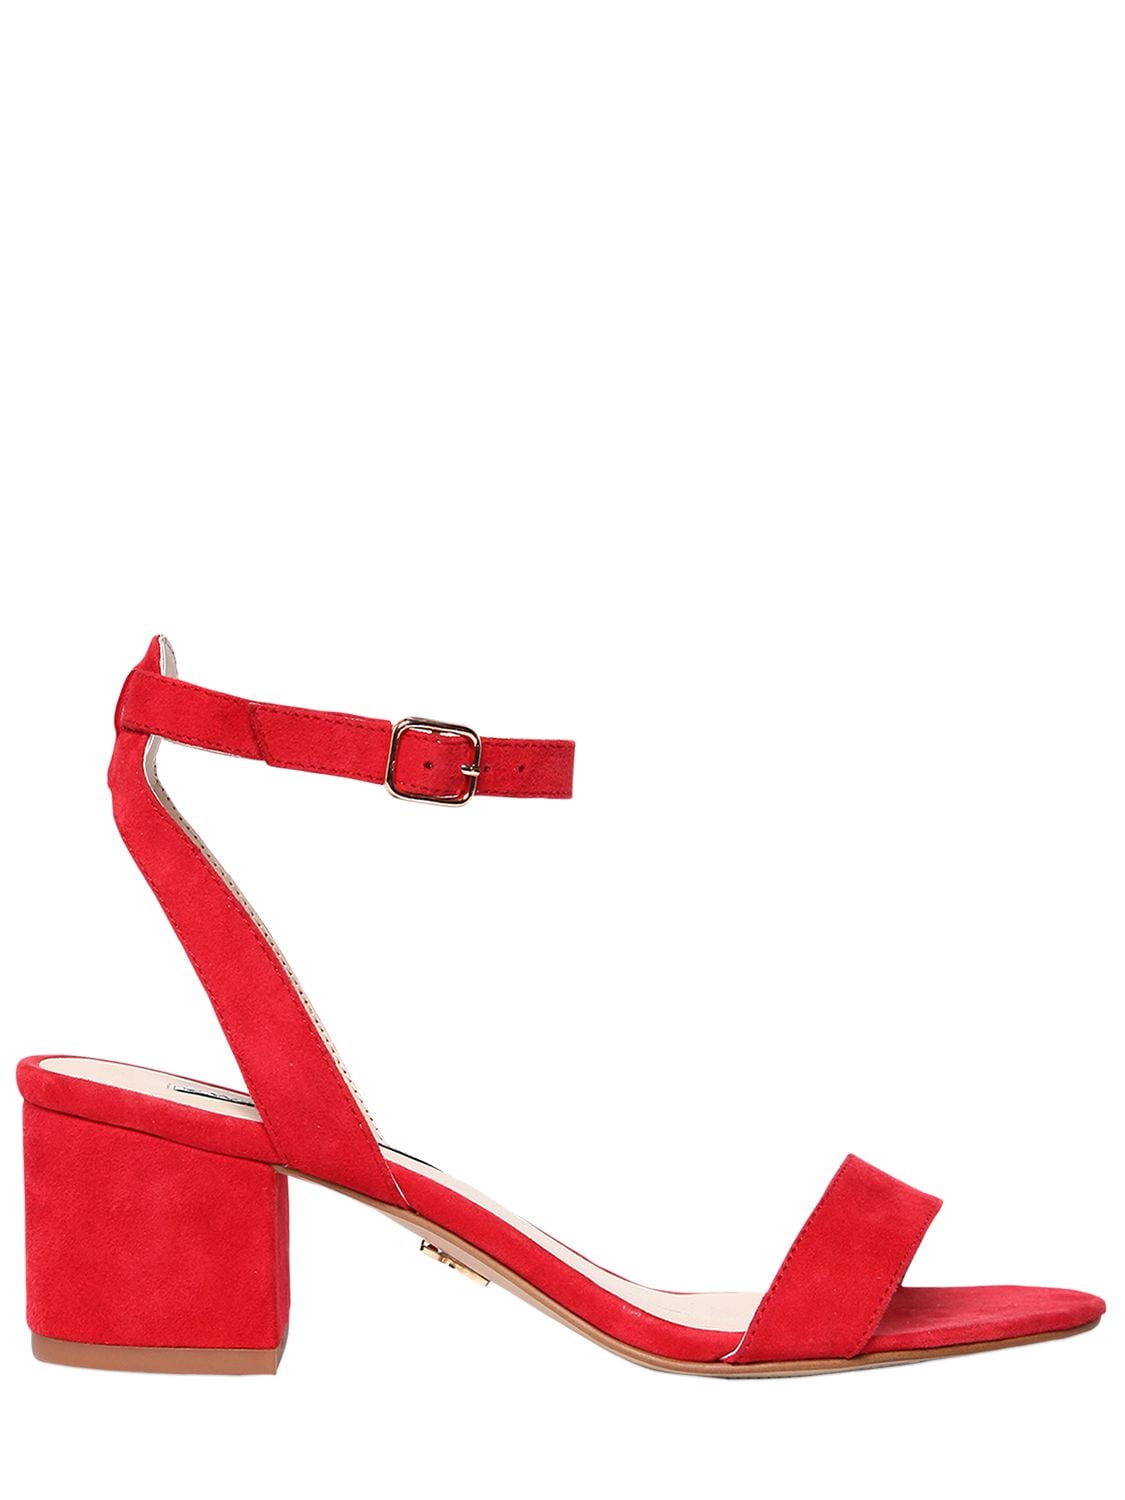 Windsor Smith 60mm Melani Suede Sandals In Red